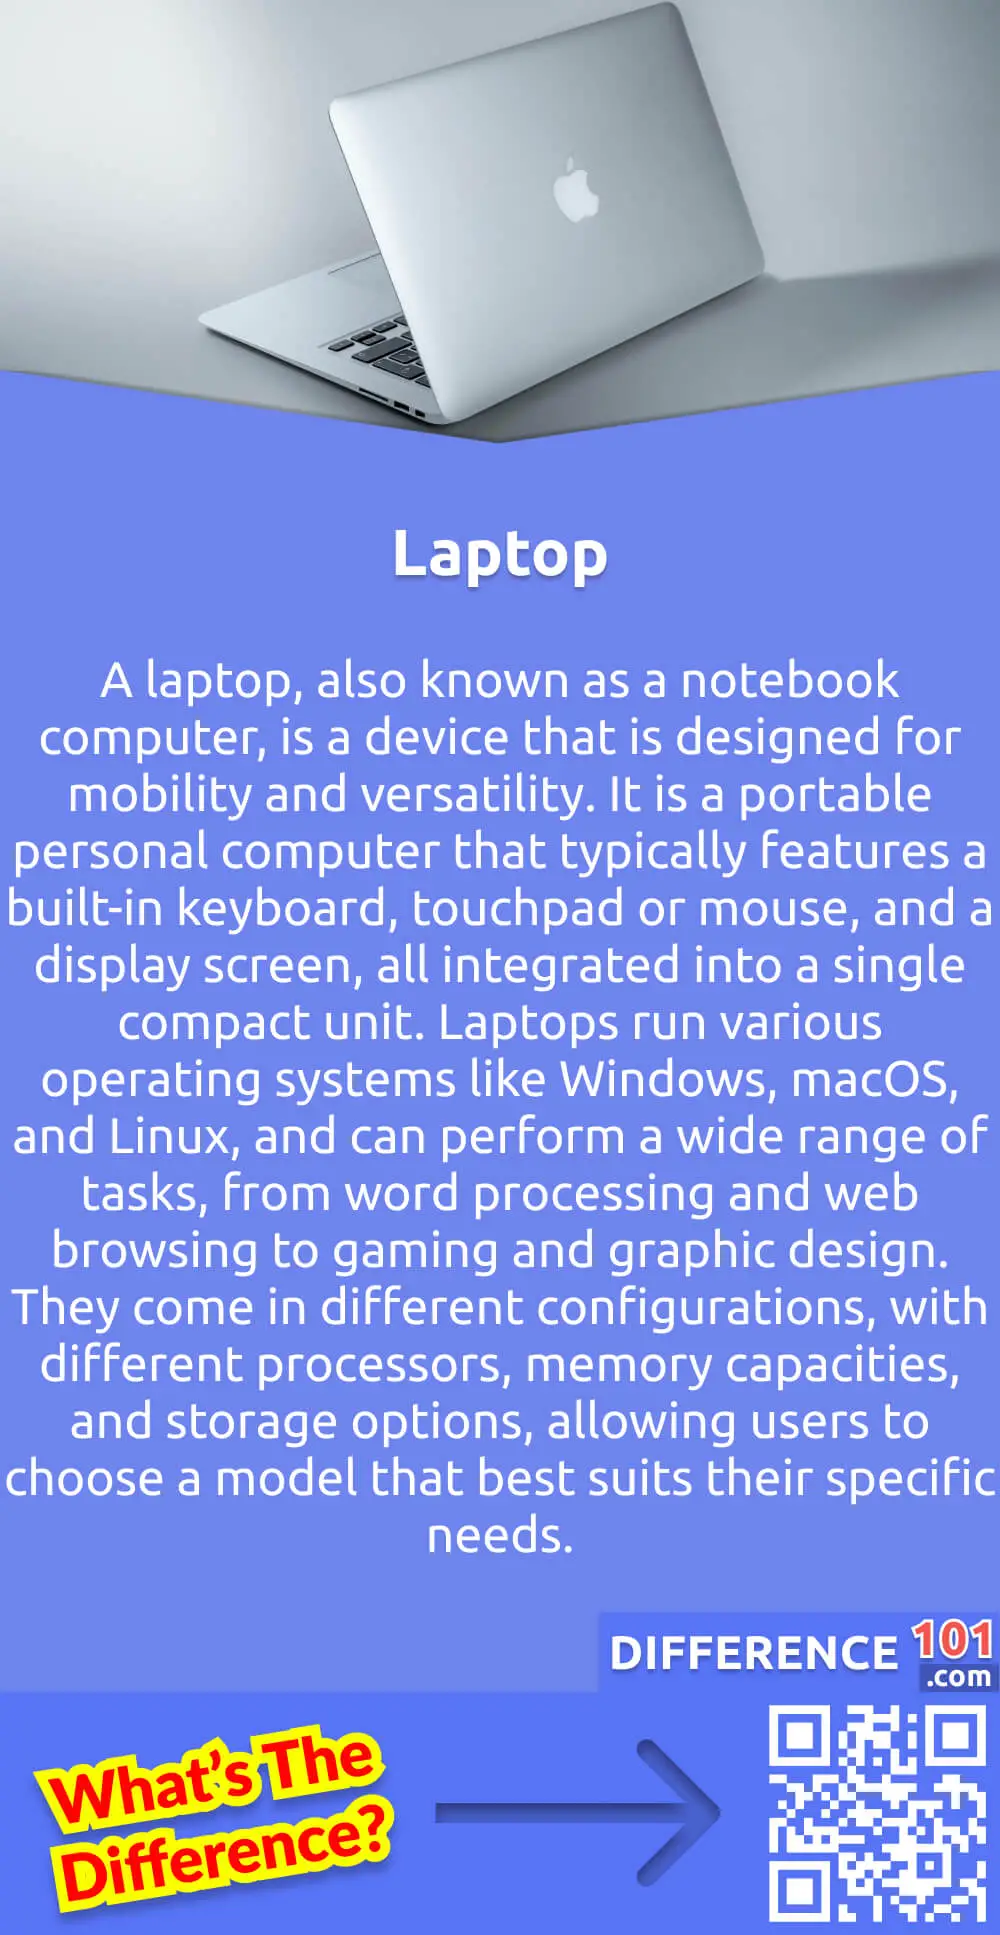 What Is a Laptop? A laptop, also known as a notebook computer, is a device that is designed for mobility and versatility. It is a portable personal computer that typically features a built-in keyboard, touchpad or mouse, and a display screen, all integrated into a single compact unit. Laptops run various operating systems like Windows, macOS, and Linux, and can perform a wide range of tasks, from word processing and web browsing to gaming and graphic design. They come in different configurations, with different processors, memory capacities, and storage options, allowing users to choose a model that best suits their specific needs. Laptops are widely used in both professional and personal settings, offering the flexibility to work or access information from virtually anywhere with an available power source.
